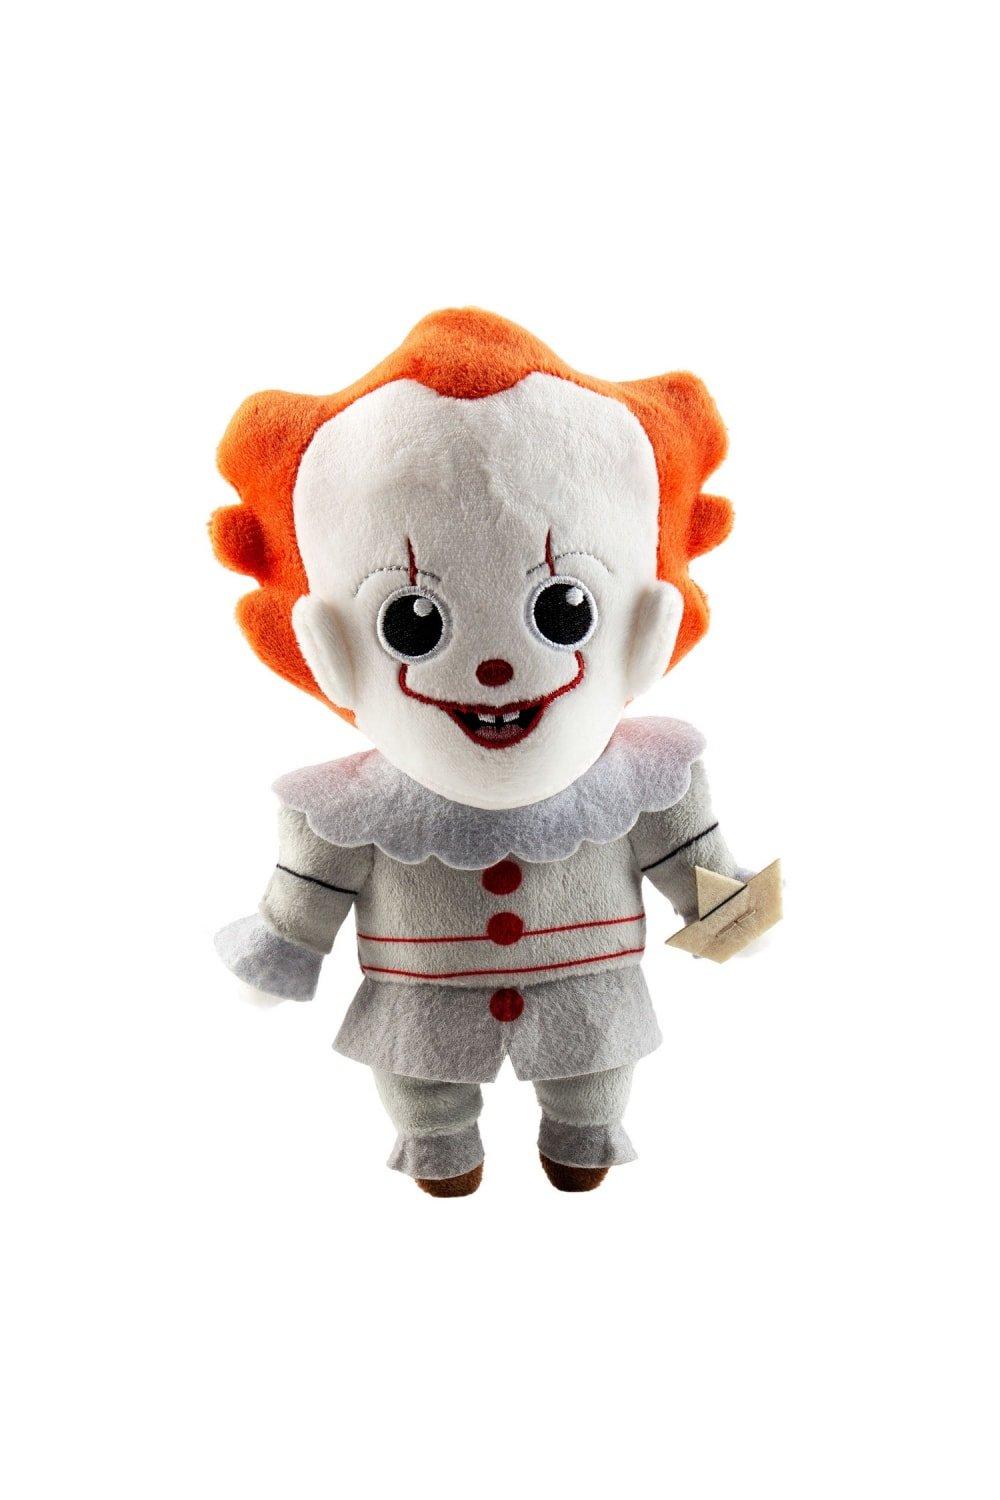 kidrobot pennywise character plush toy